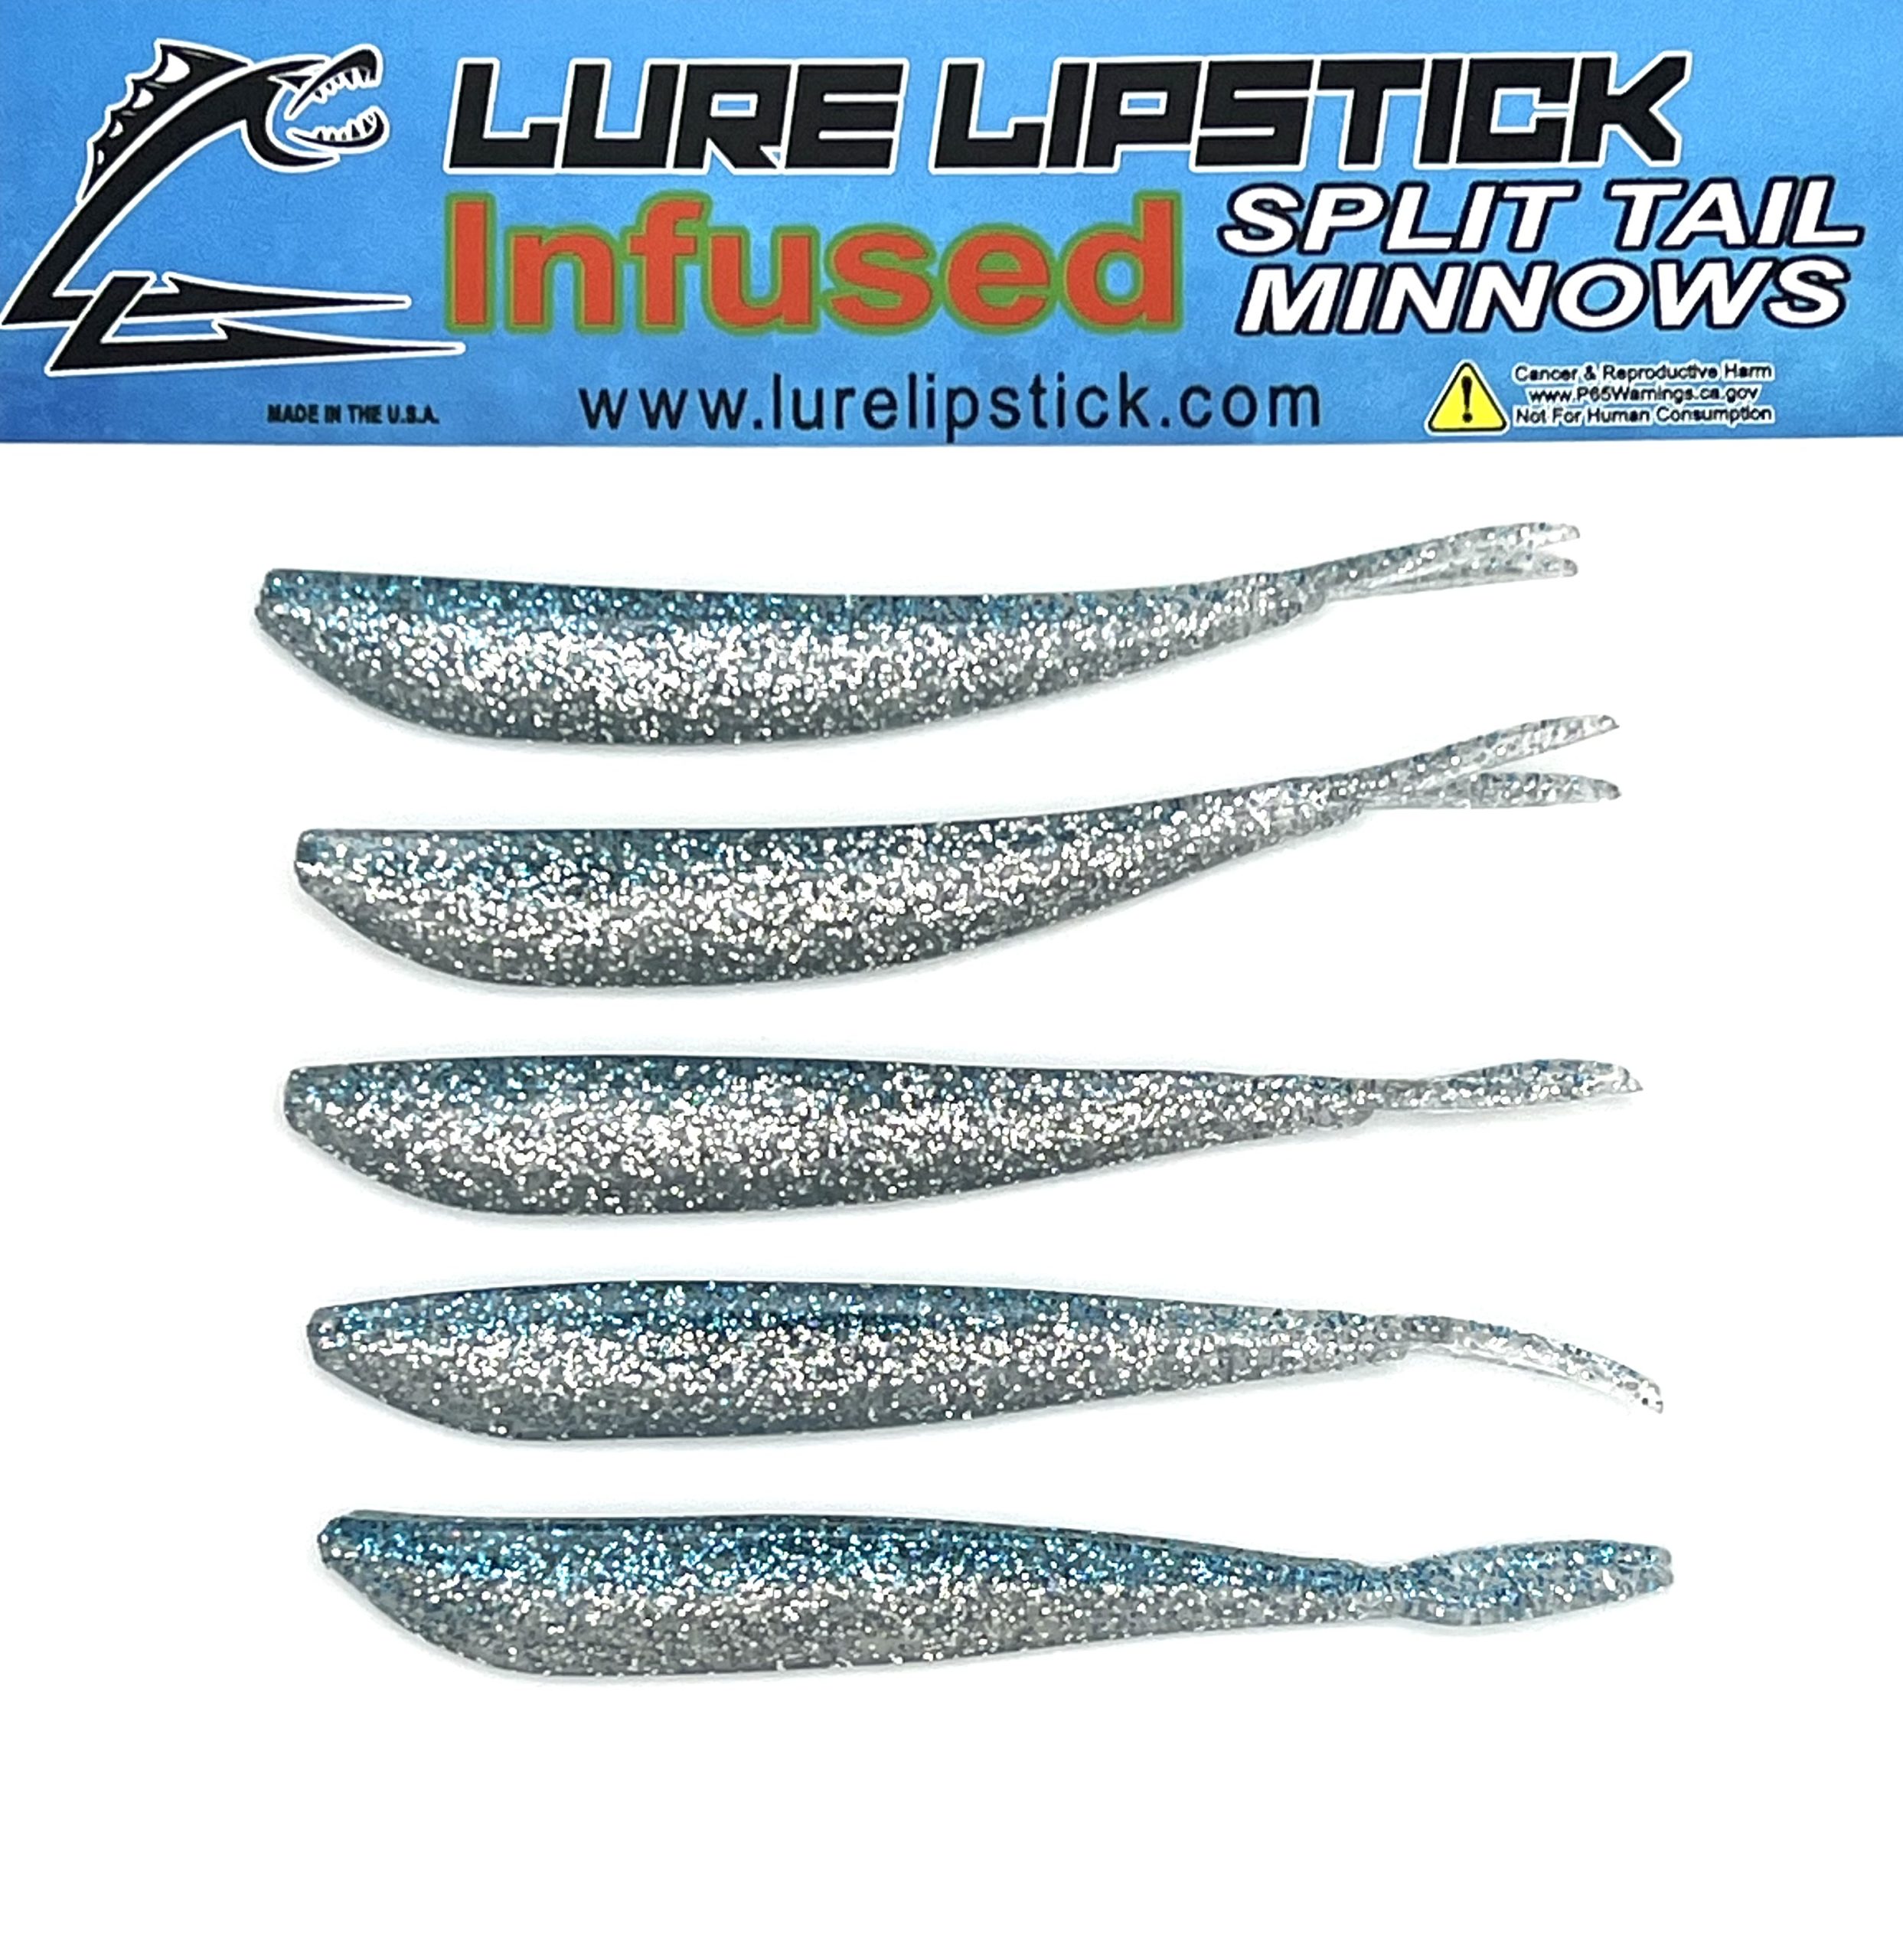 4 INCH 5 PACK CUSTOM SCENTED SPLIT TAIL MINNOWS - CRYSTAL ICE